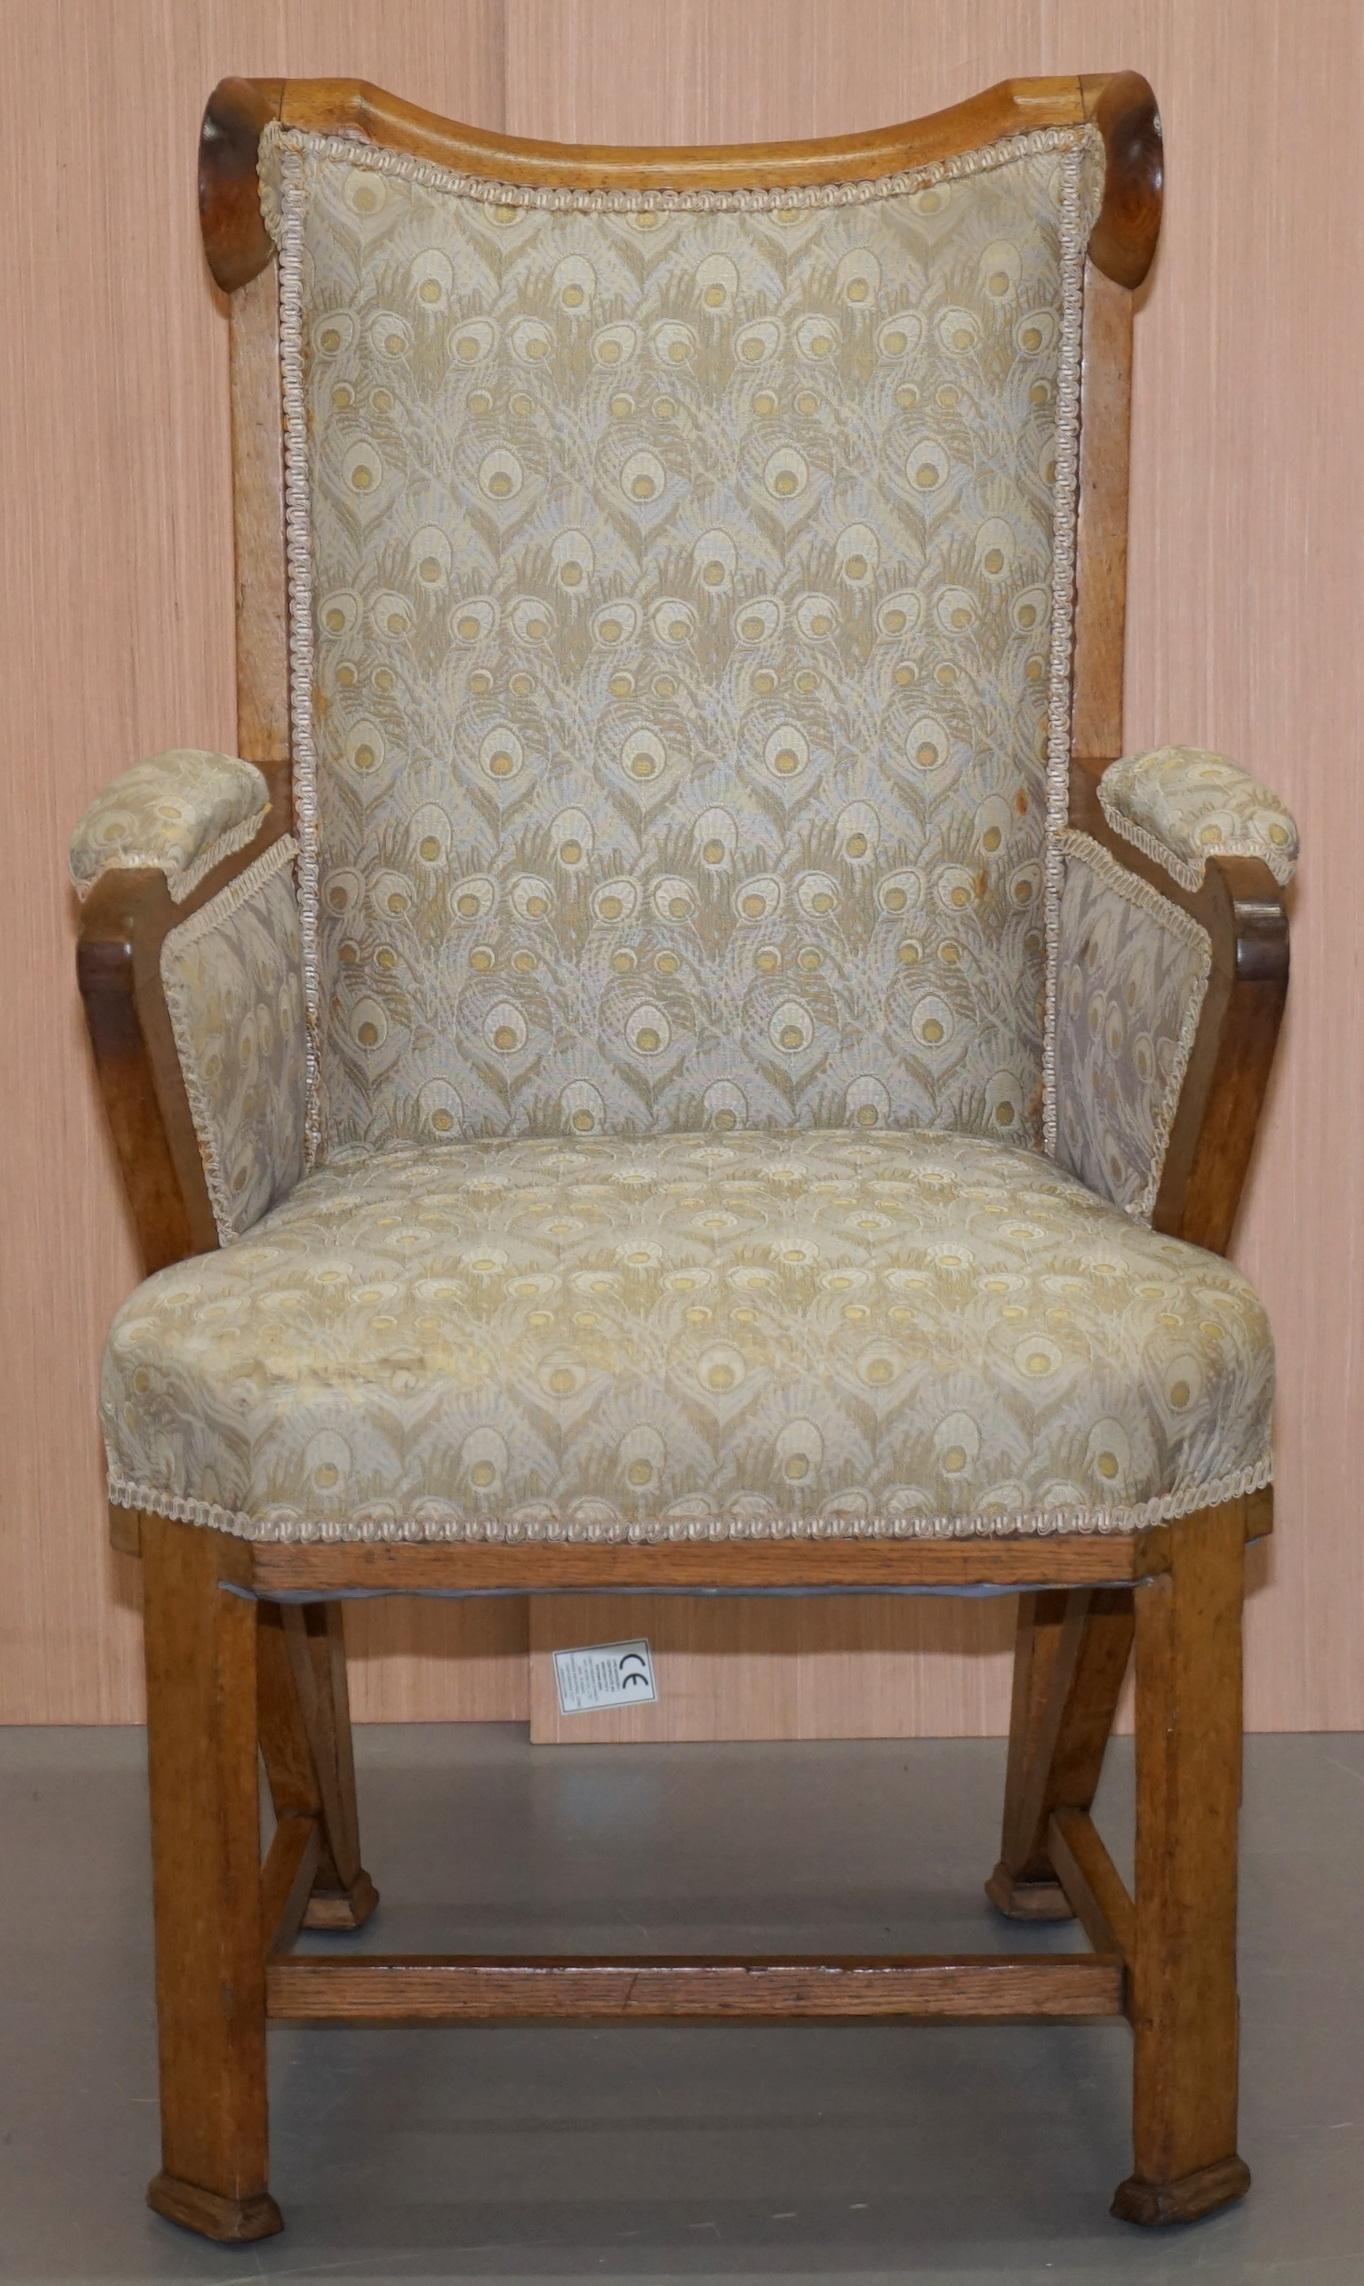 We are delighted to offer for sale this lovely hand made solid oak late Victorian wingback armchair upholstered with Liberty’s London Mermaid Hera Linen Union peacock upholstery

A very good looking and well made piece, the lines when viewed from